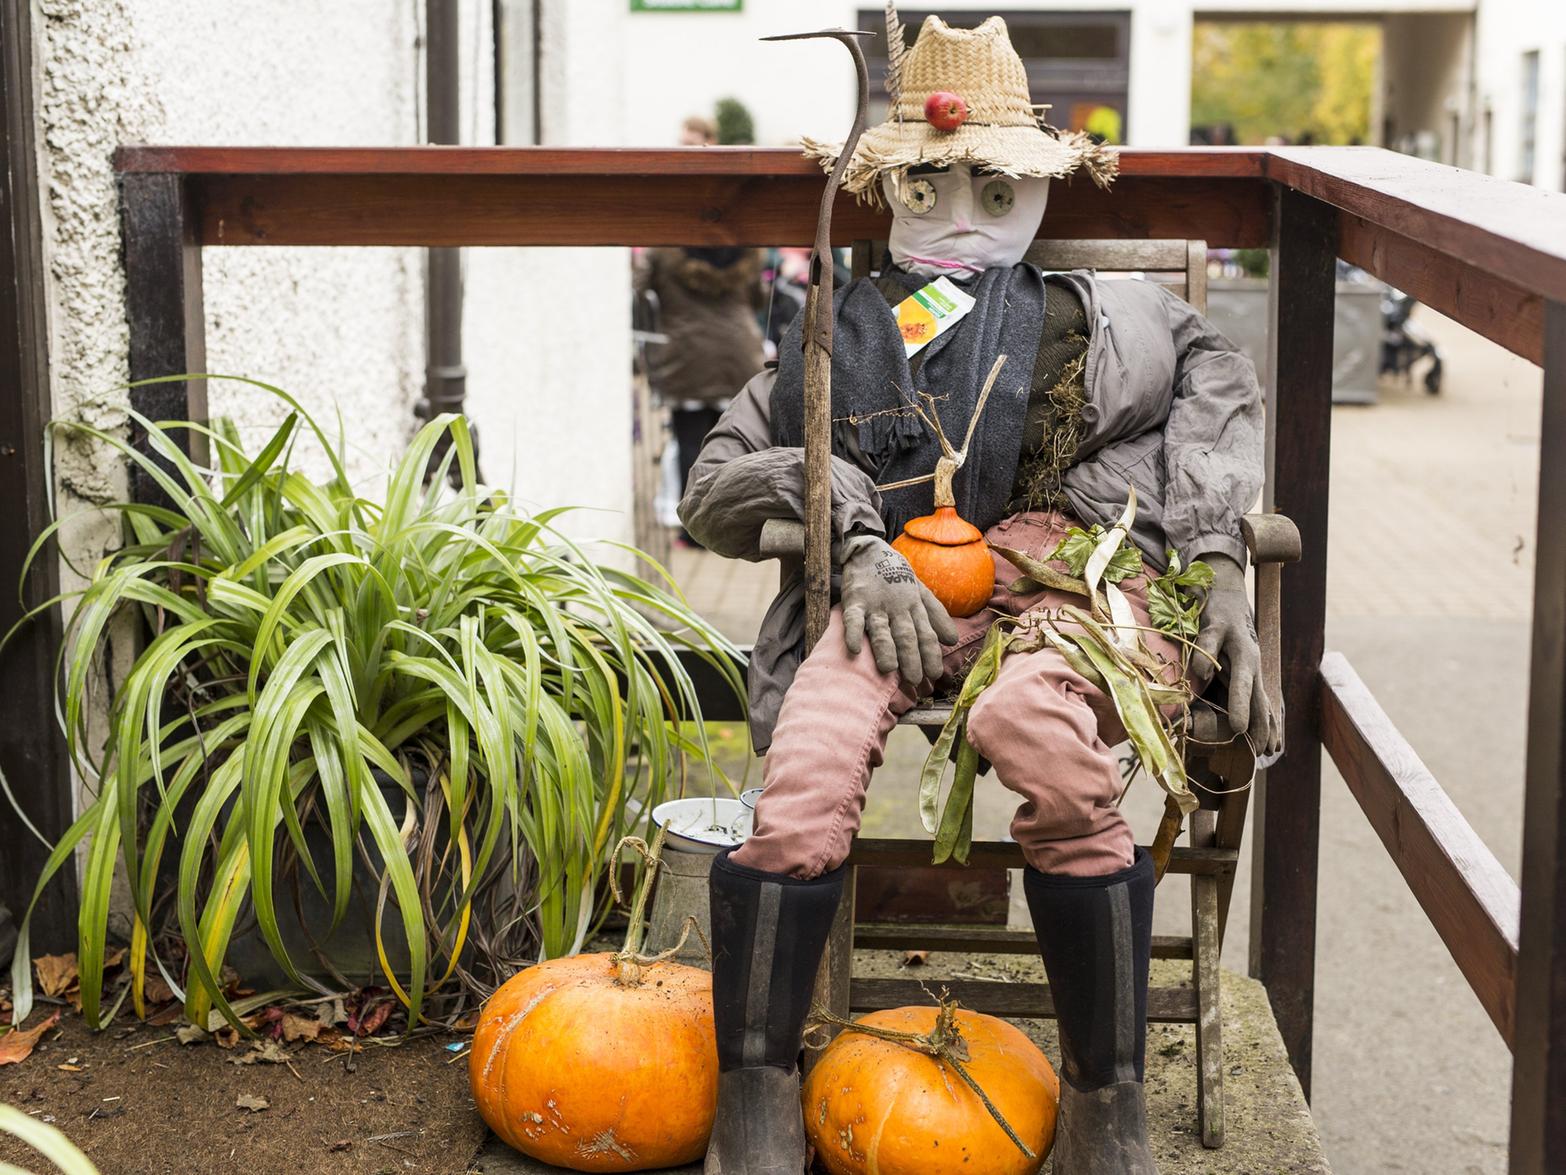 Walk through the haunted woods and a town full of skeletons at Lotherton. The estates spooky scarecrow trail returns from Oct 26 until Nov 3 featuring Scarecrow Skeletown and scary side of the Wild West.